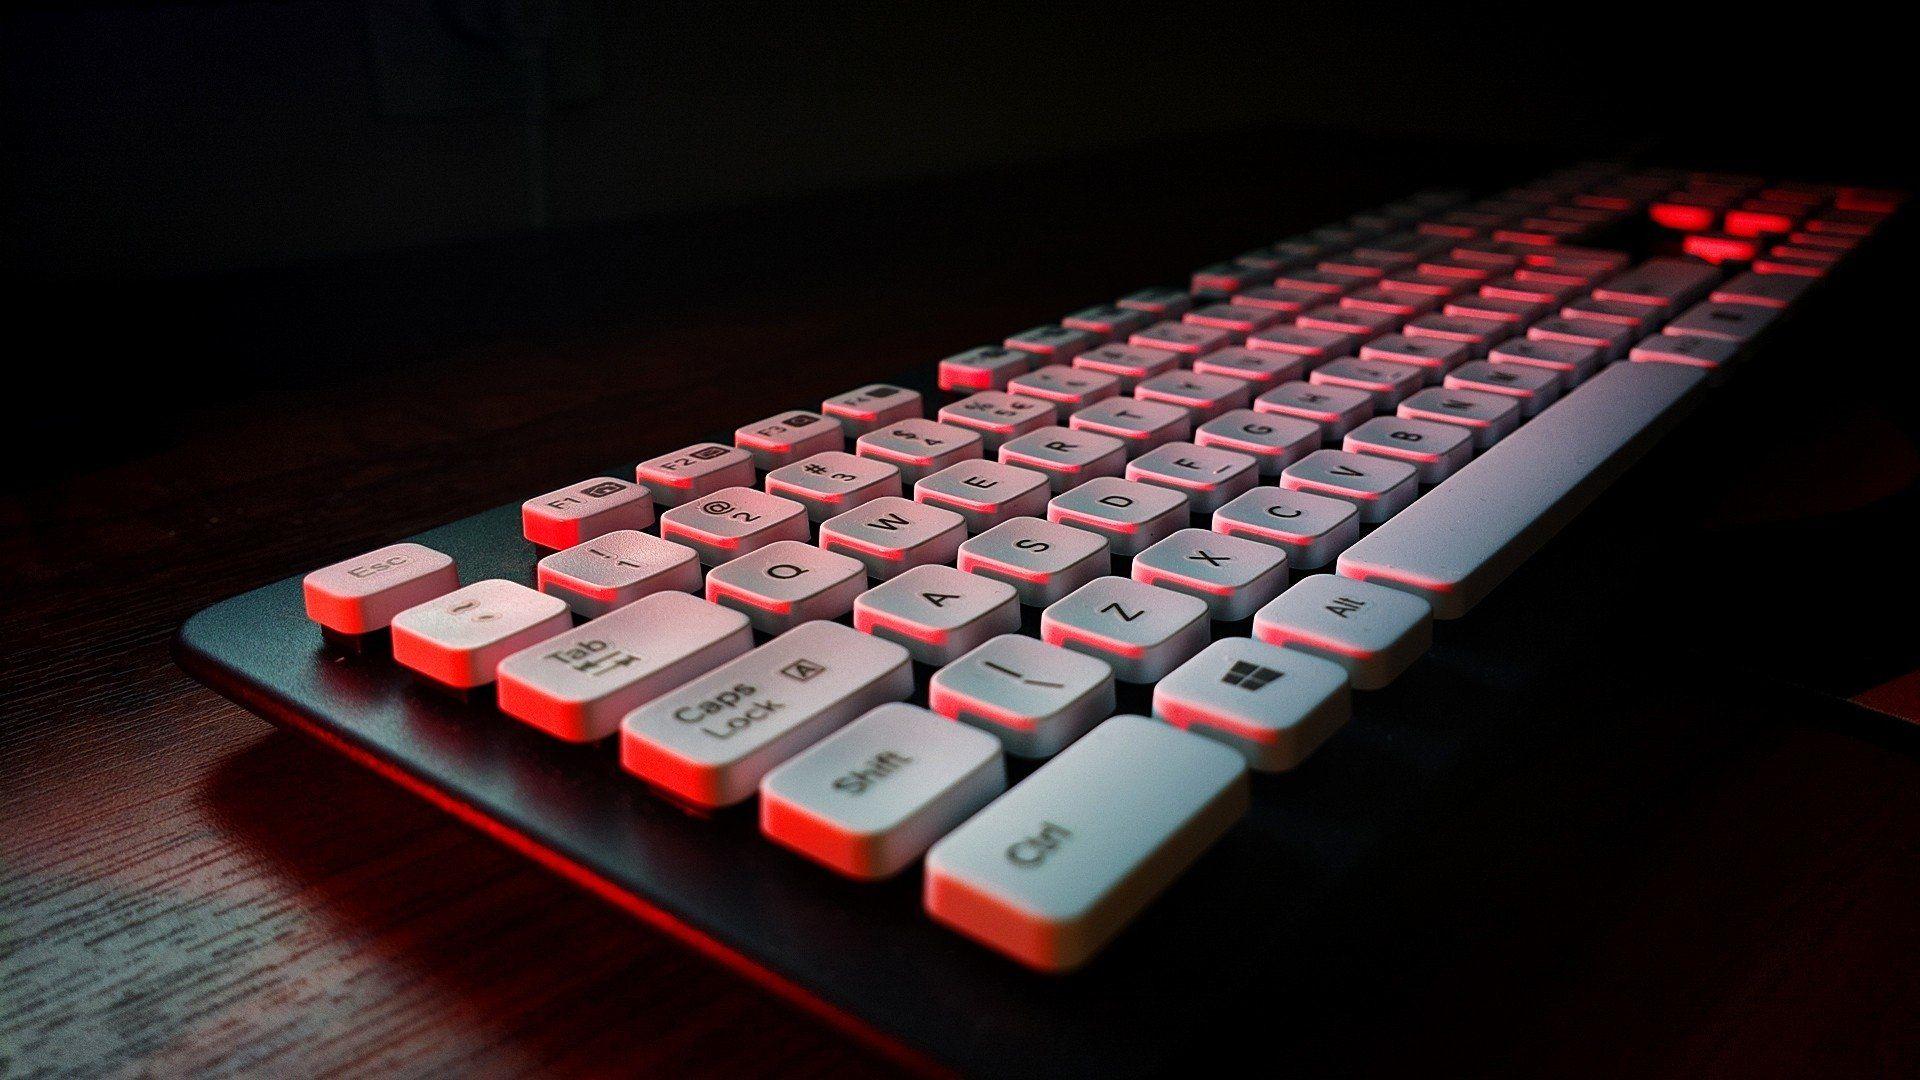 Keyboard HD Wallpaper and Background Image